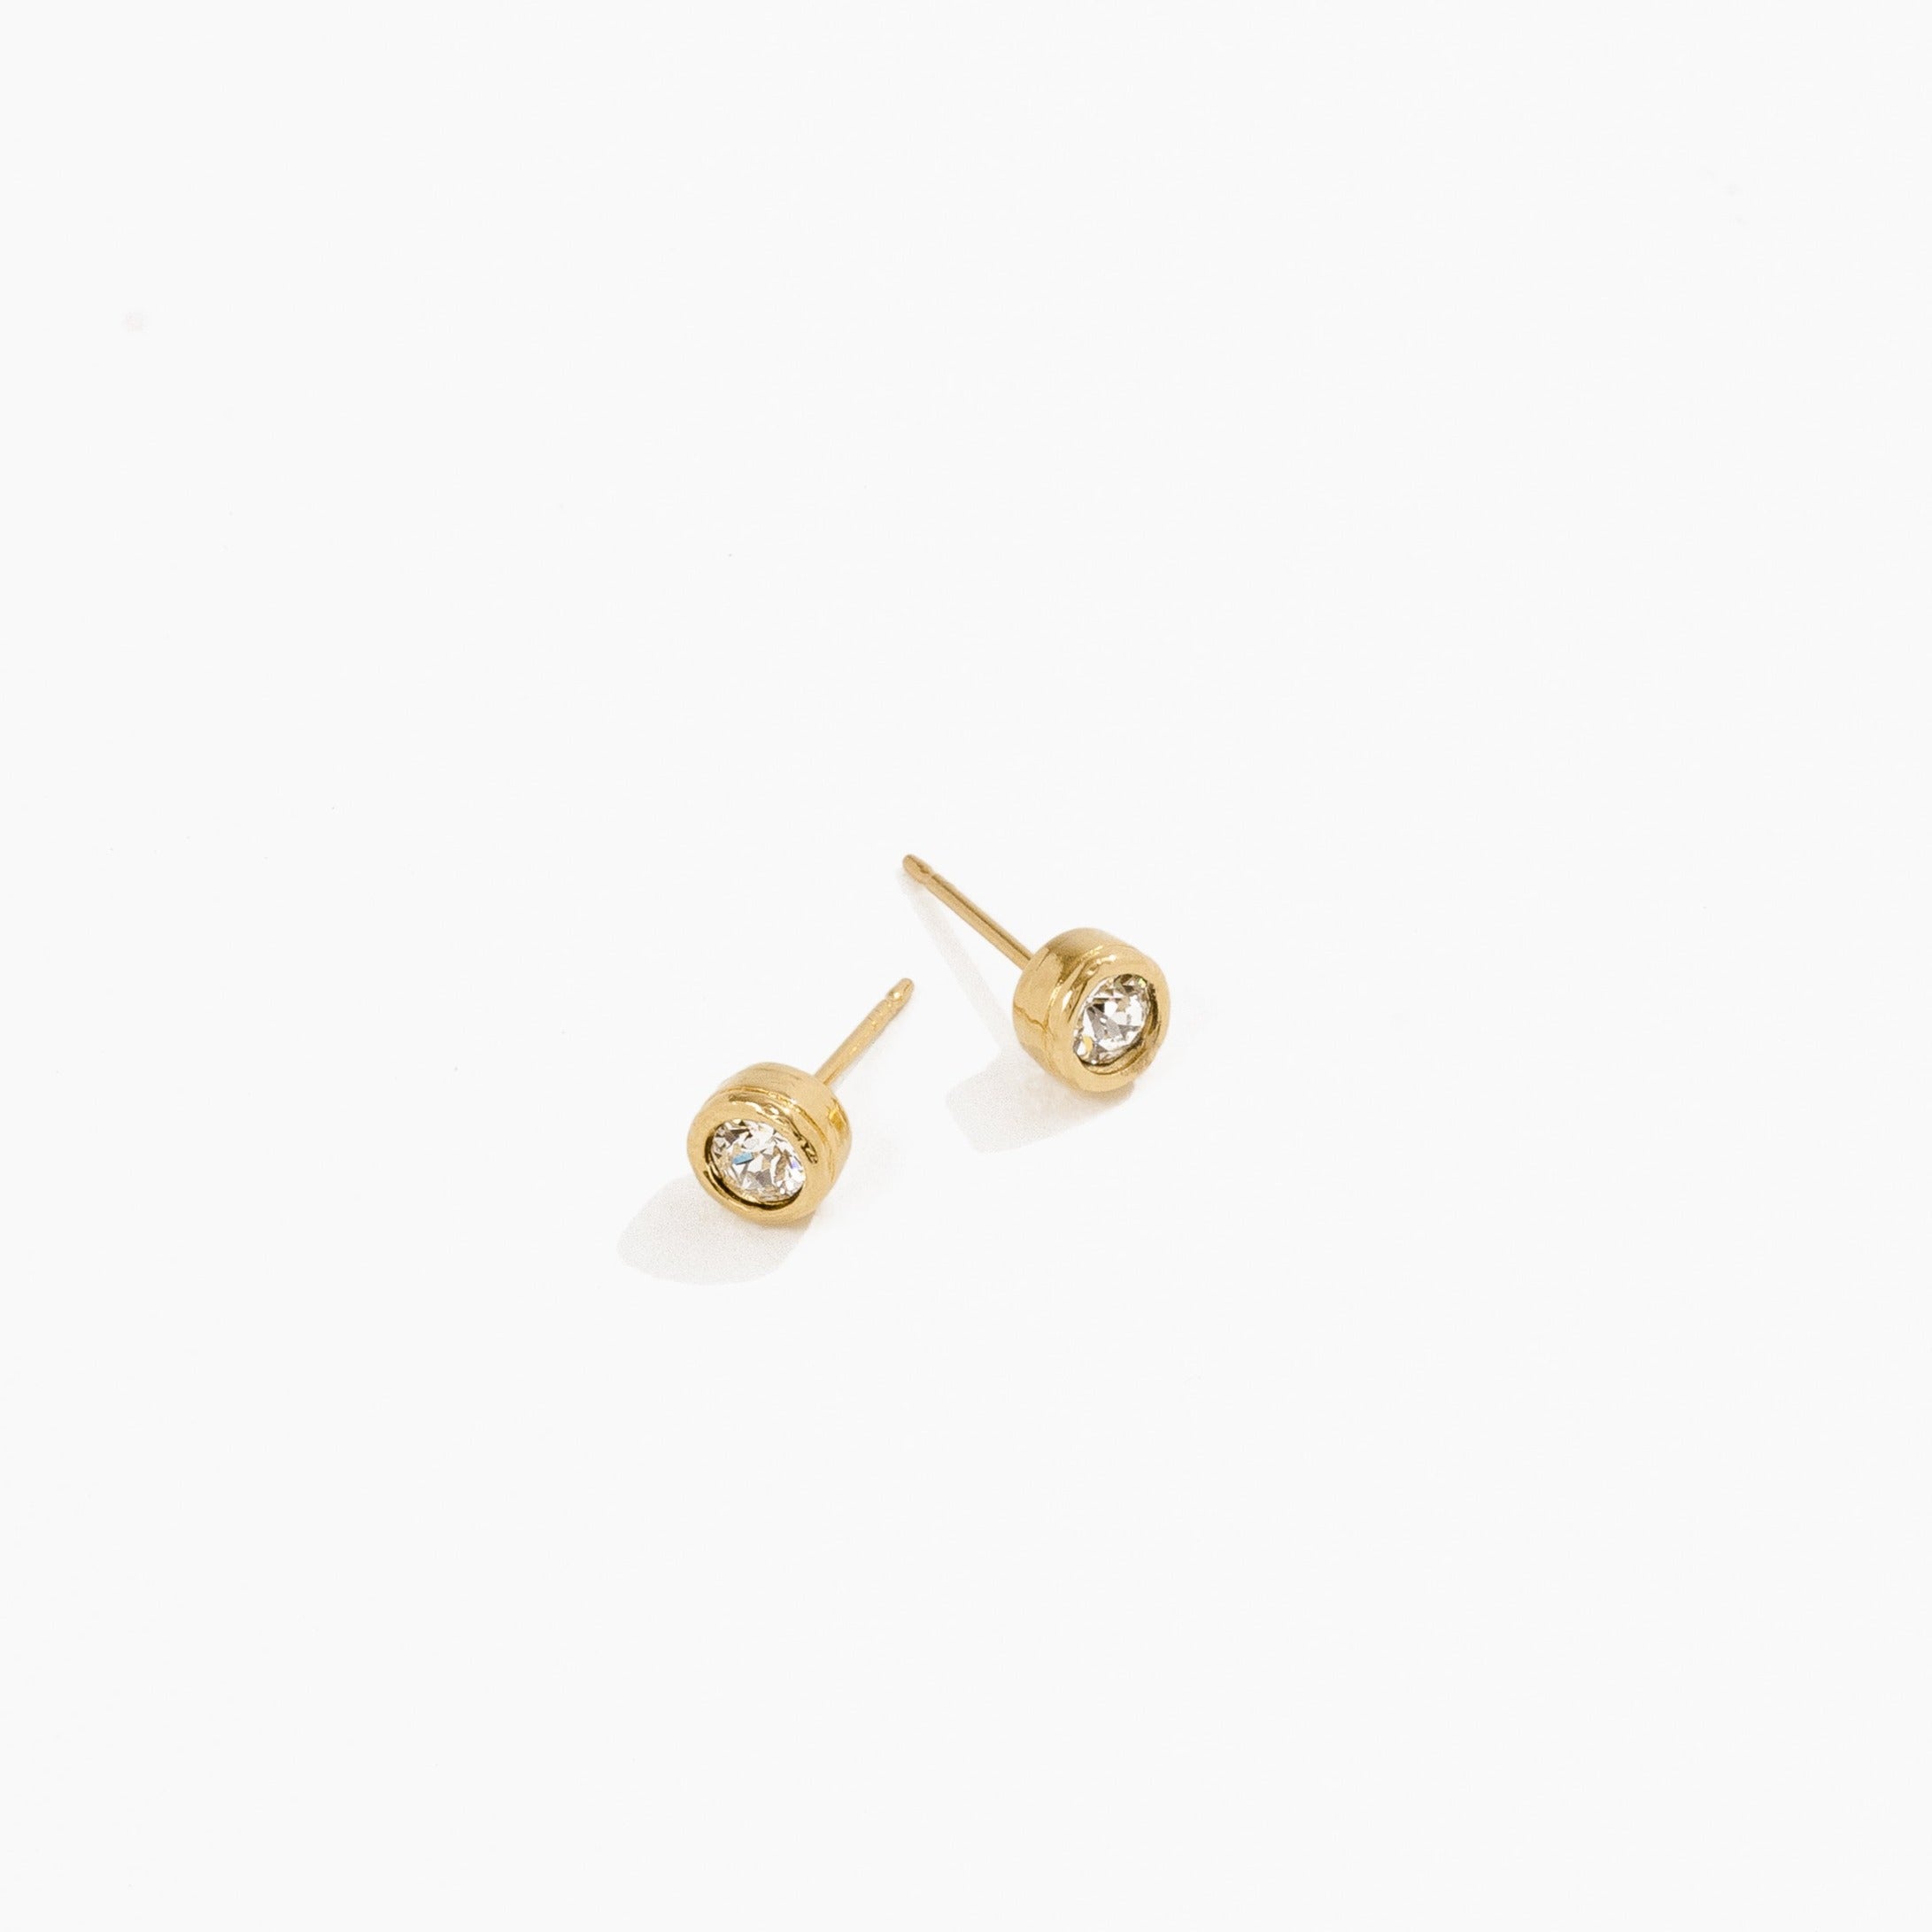 04 April Birthstone Studs by Katie Dean Jewelry made in America, hypoallergenic.